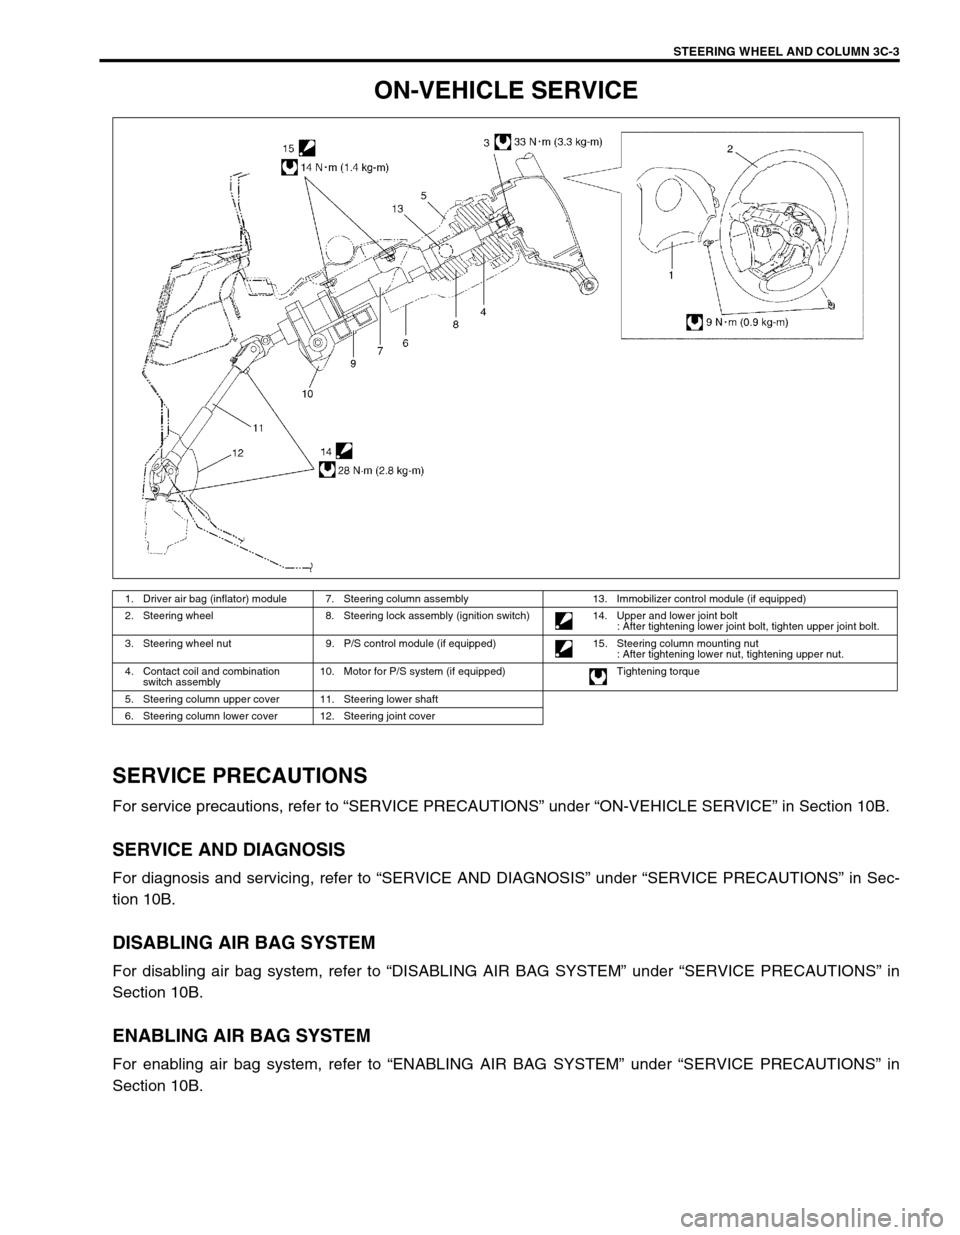 SUZUKI SWIFT 2000 1.G RG413 Service Workshop Manual STEERING WHEEL AND COLUMN 3C-3
ON-VEHICLE SERVICE
SERVICE PRECAUTIONS
For service precautions, refer to “SERVICE PRECAUTIONS” under “ON-VEHICLE SERVICE” in Section 10B.
SERVICE AND DIAGNOSIS
F